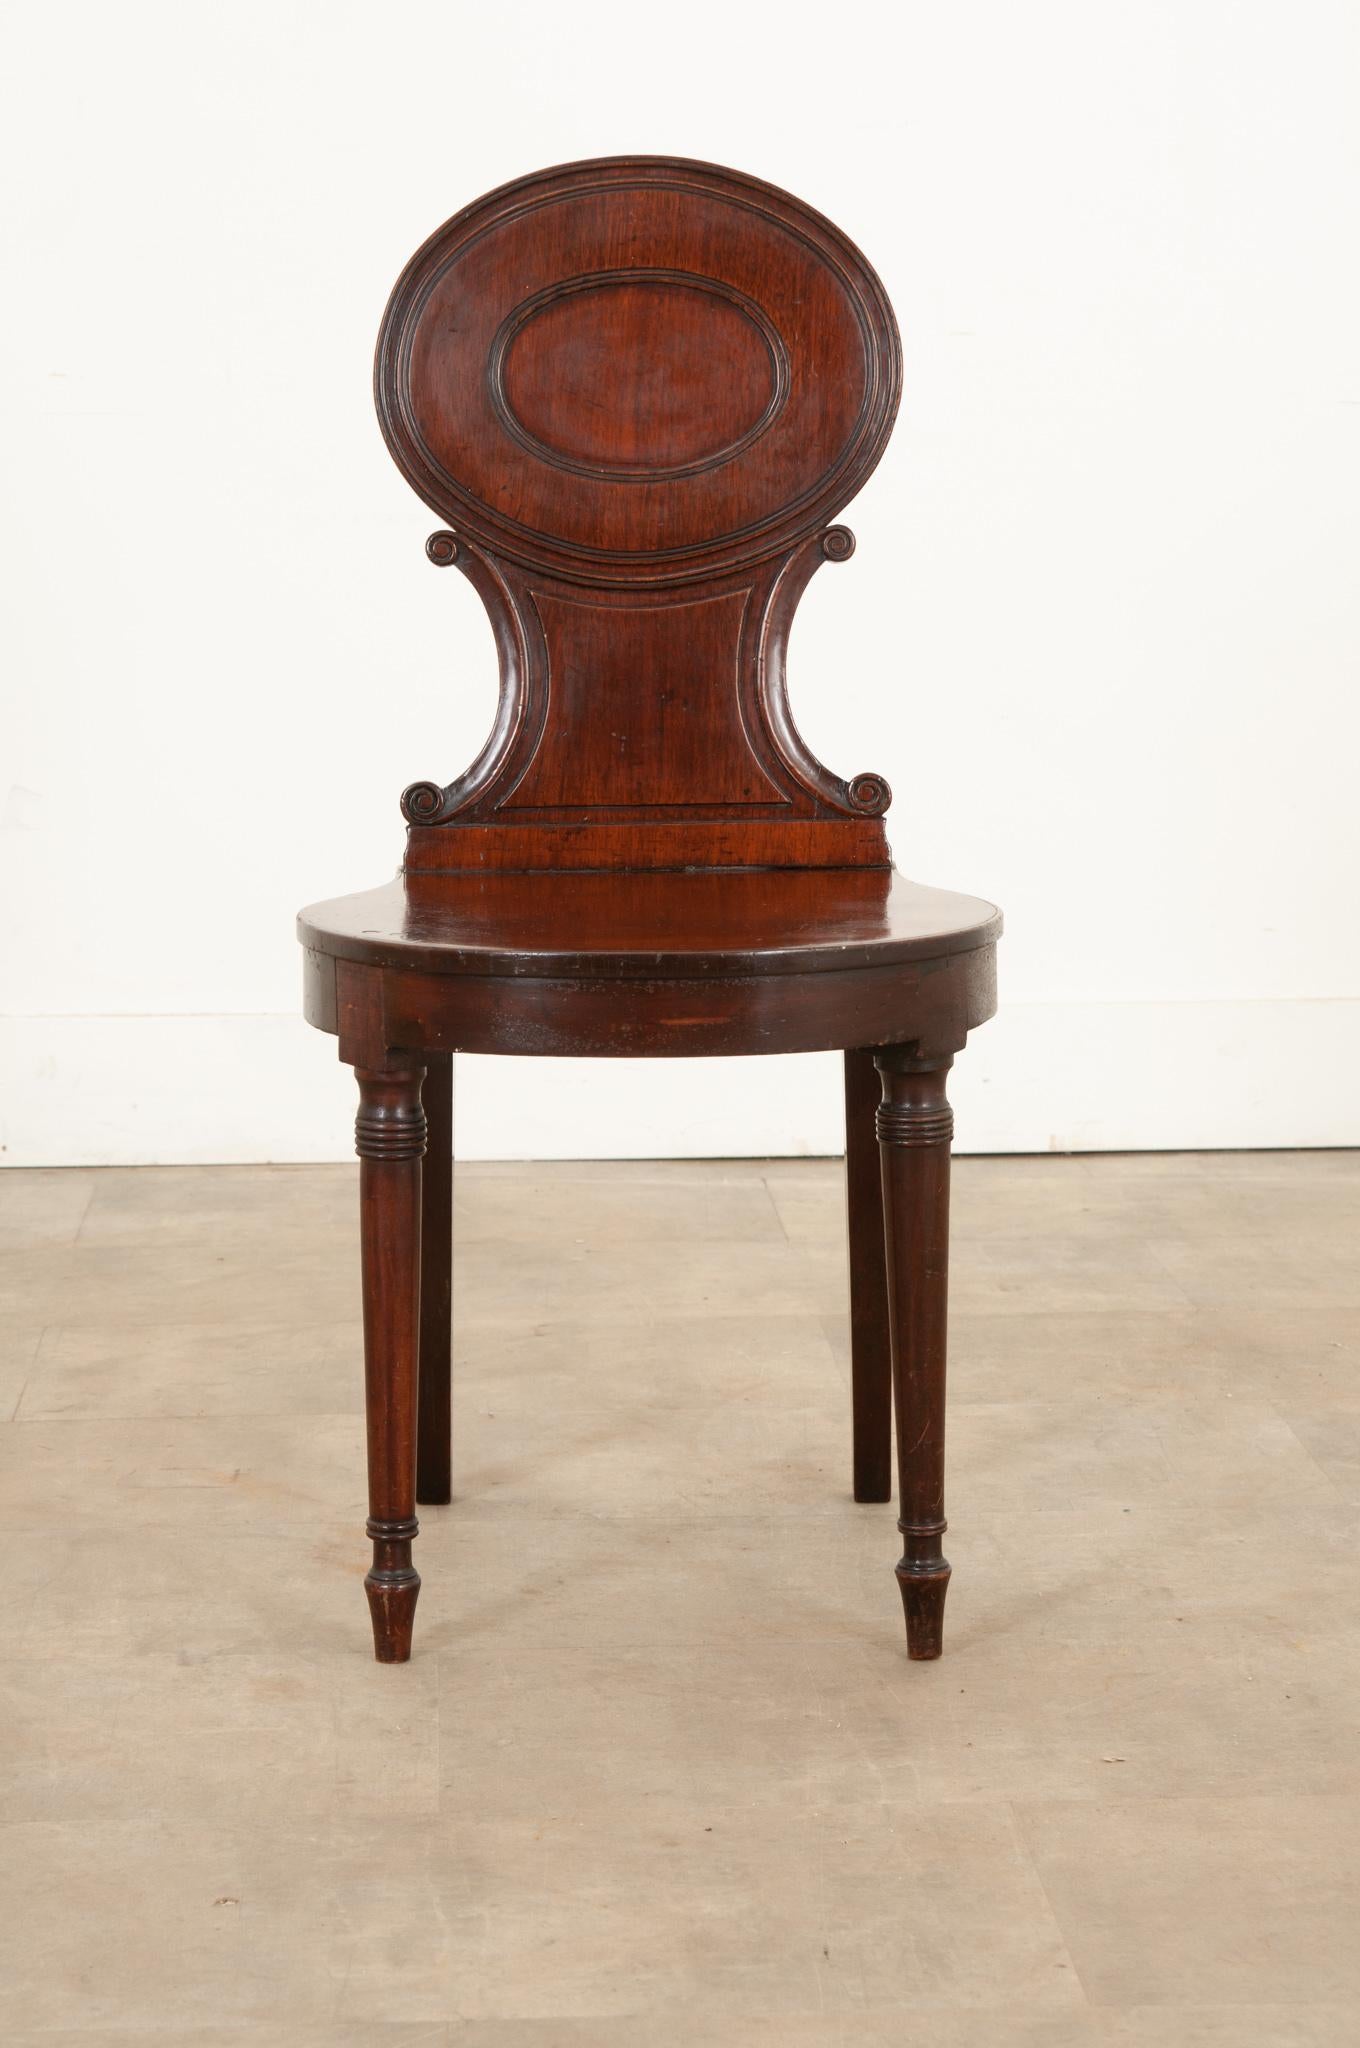 A fantastic English mahogany hall chair, made circa 1890. This handsome antique features beautifully carved details and a deep, rich coloration found within the mahogany. The front legs have been turned, while the back legs are linear, but with a